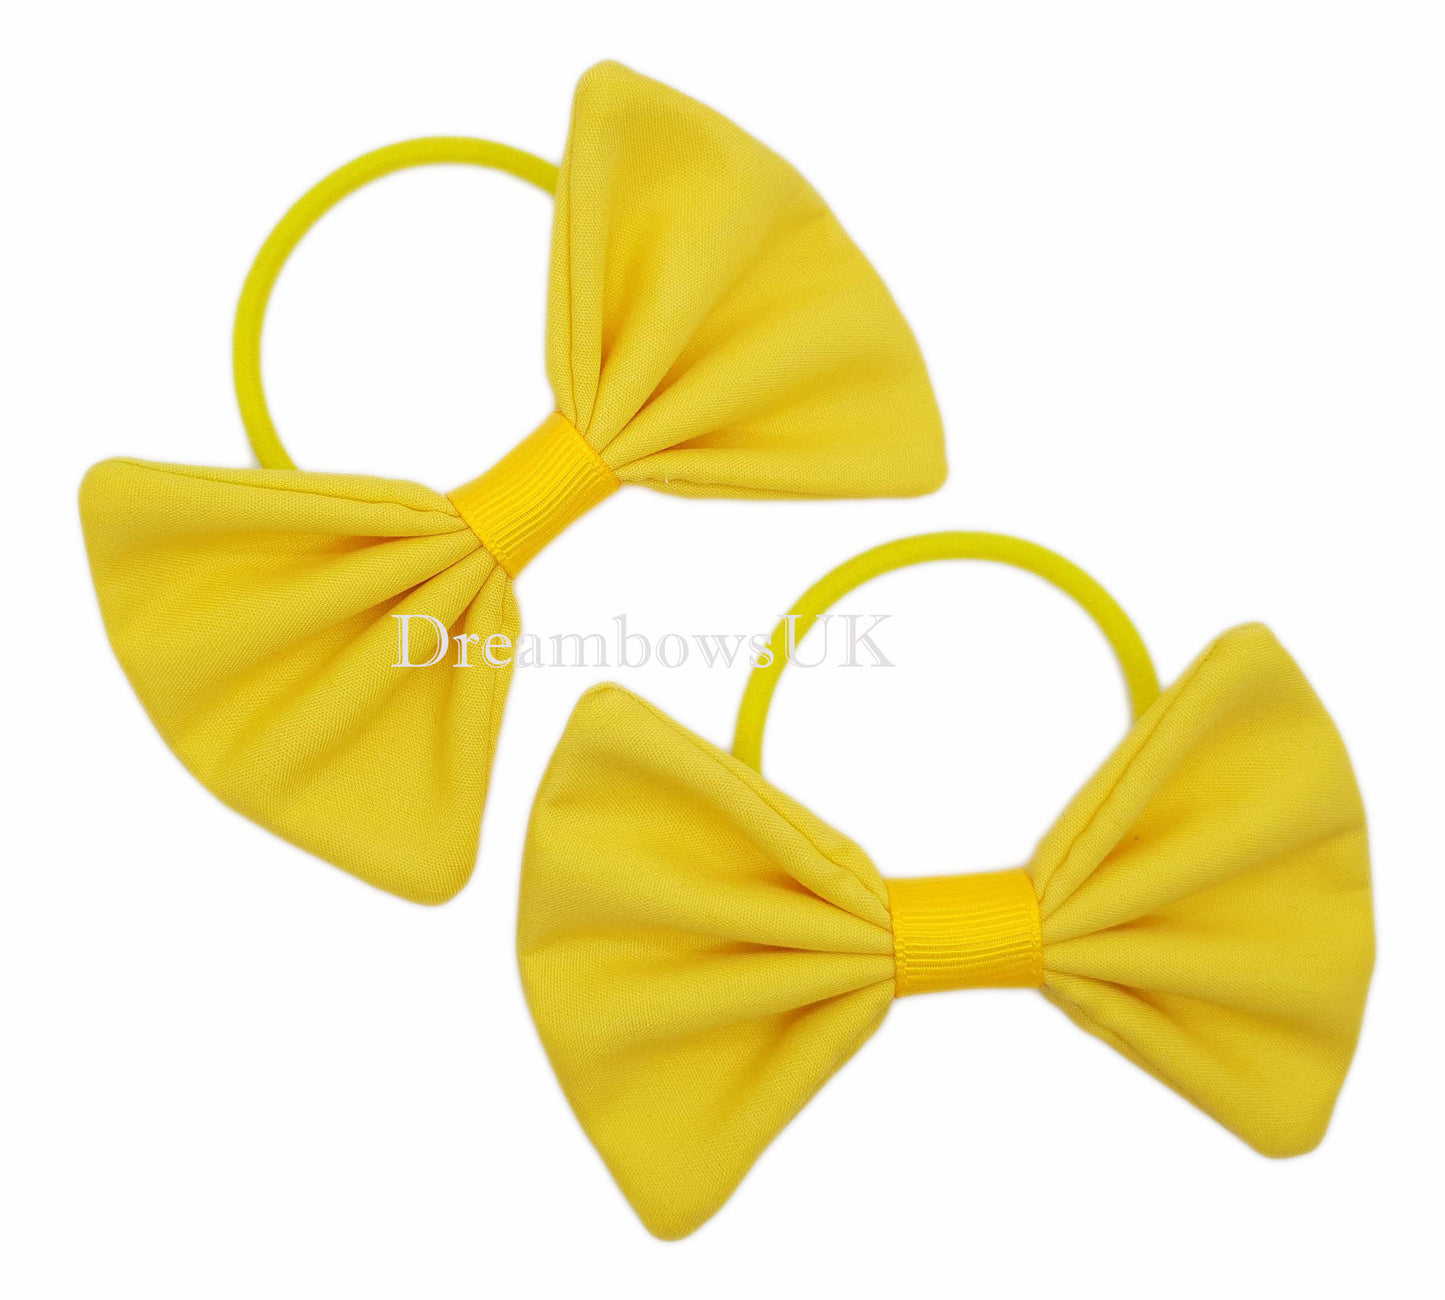 Golden yellow fabric school bows on thick bobbles